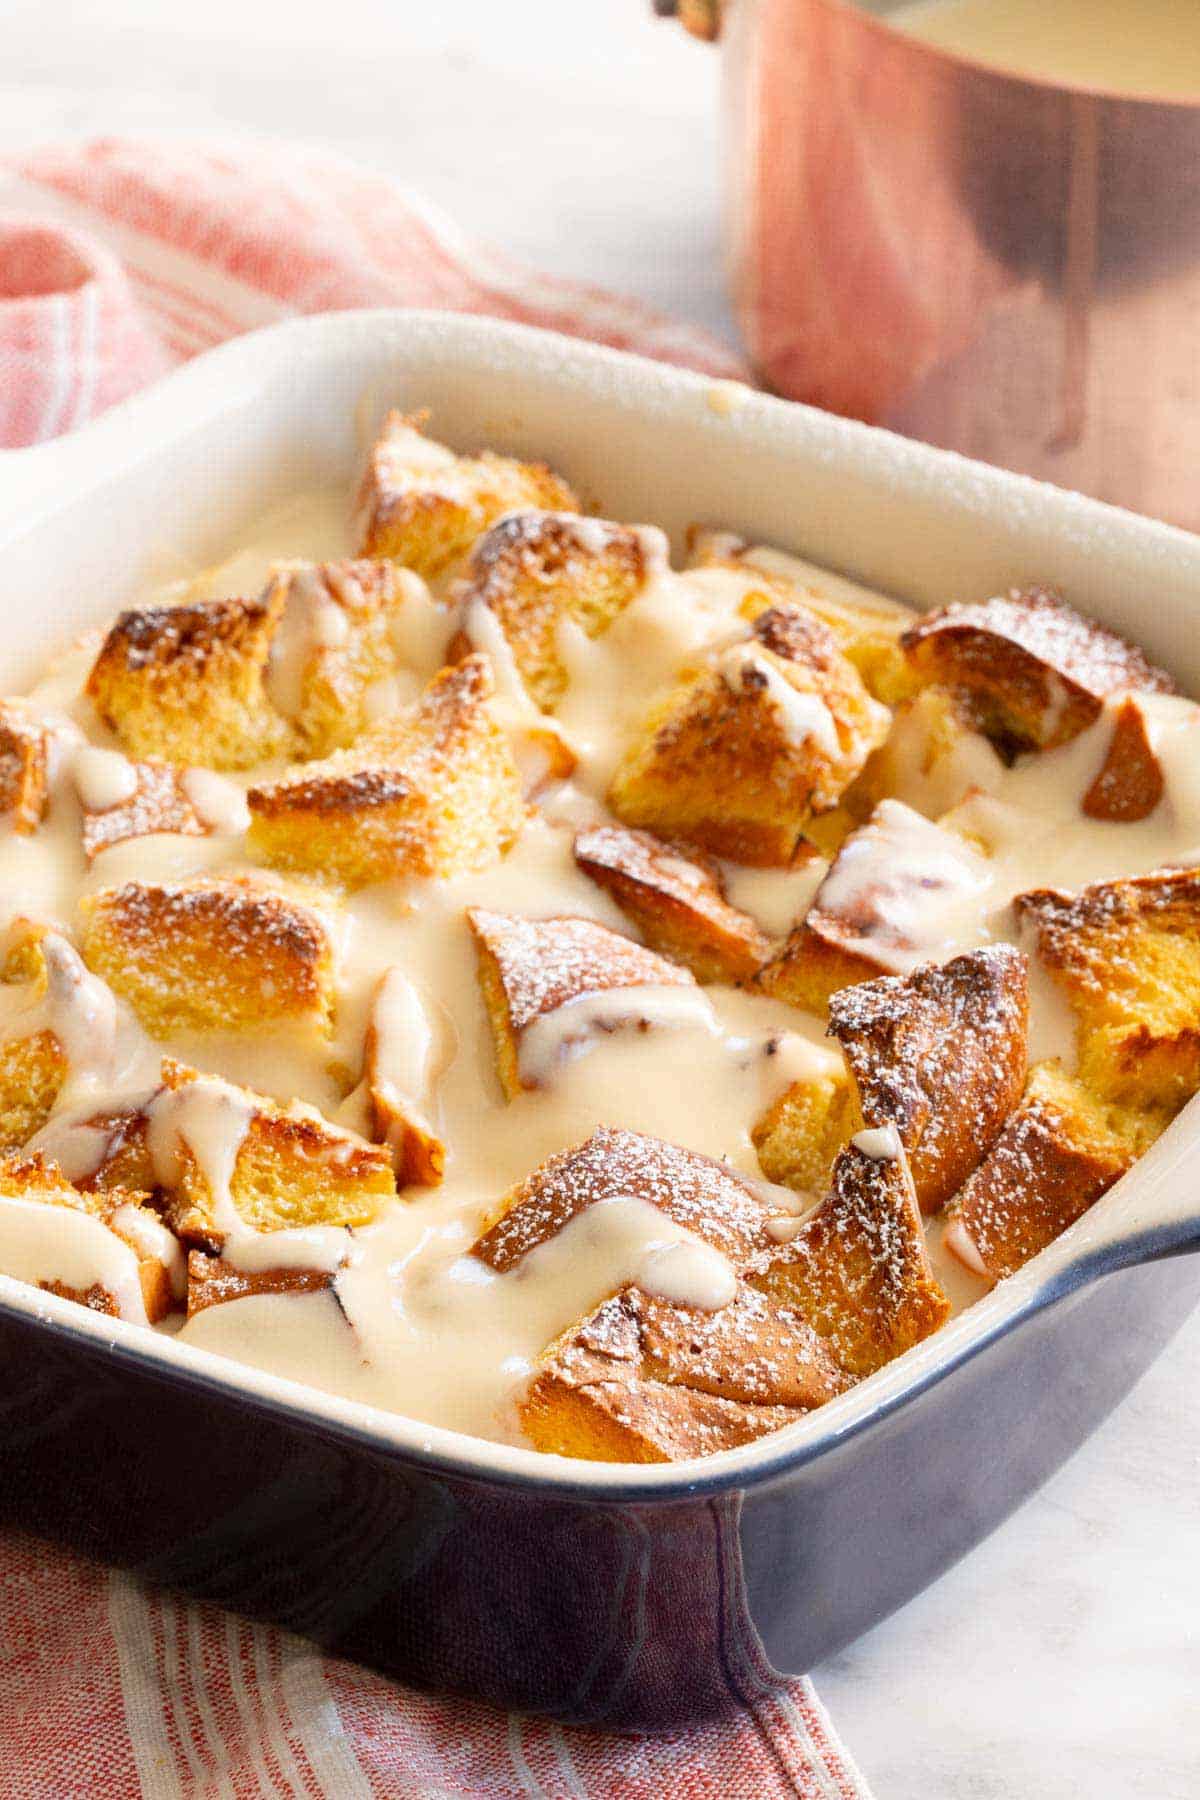 A baking dish of bread pudding with vanilla sauce on top.